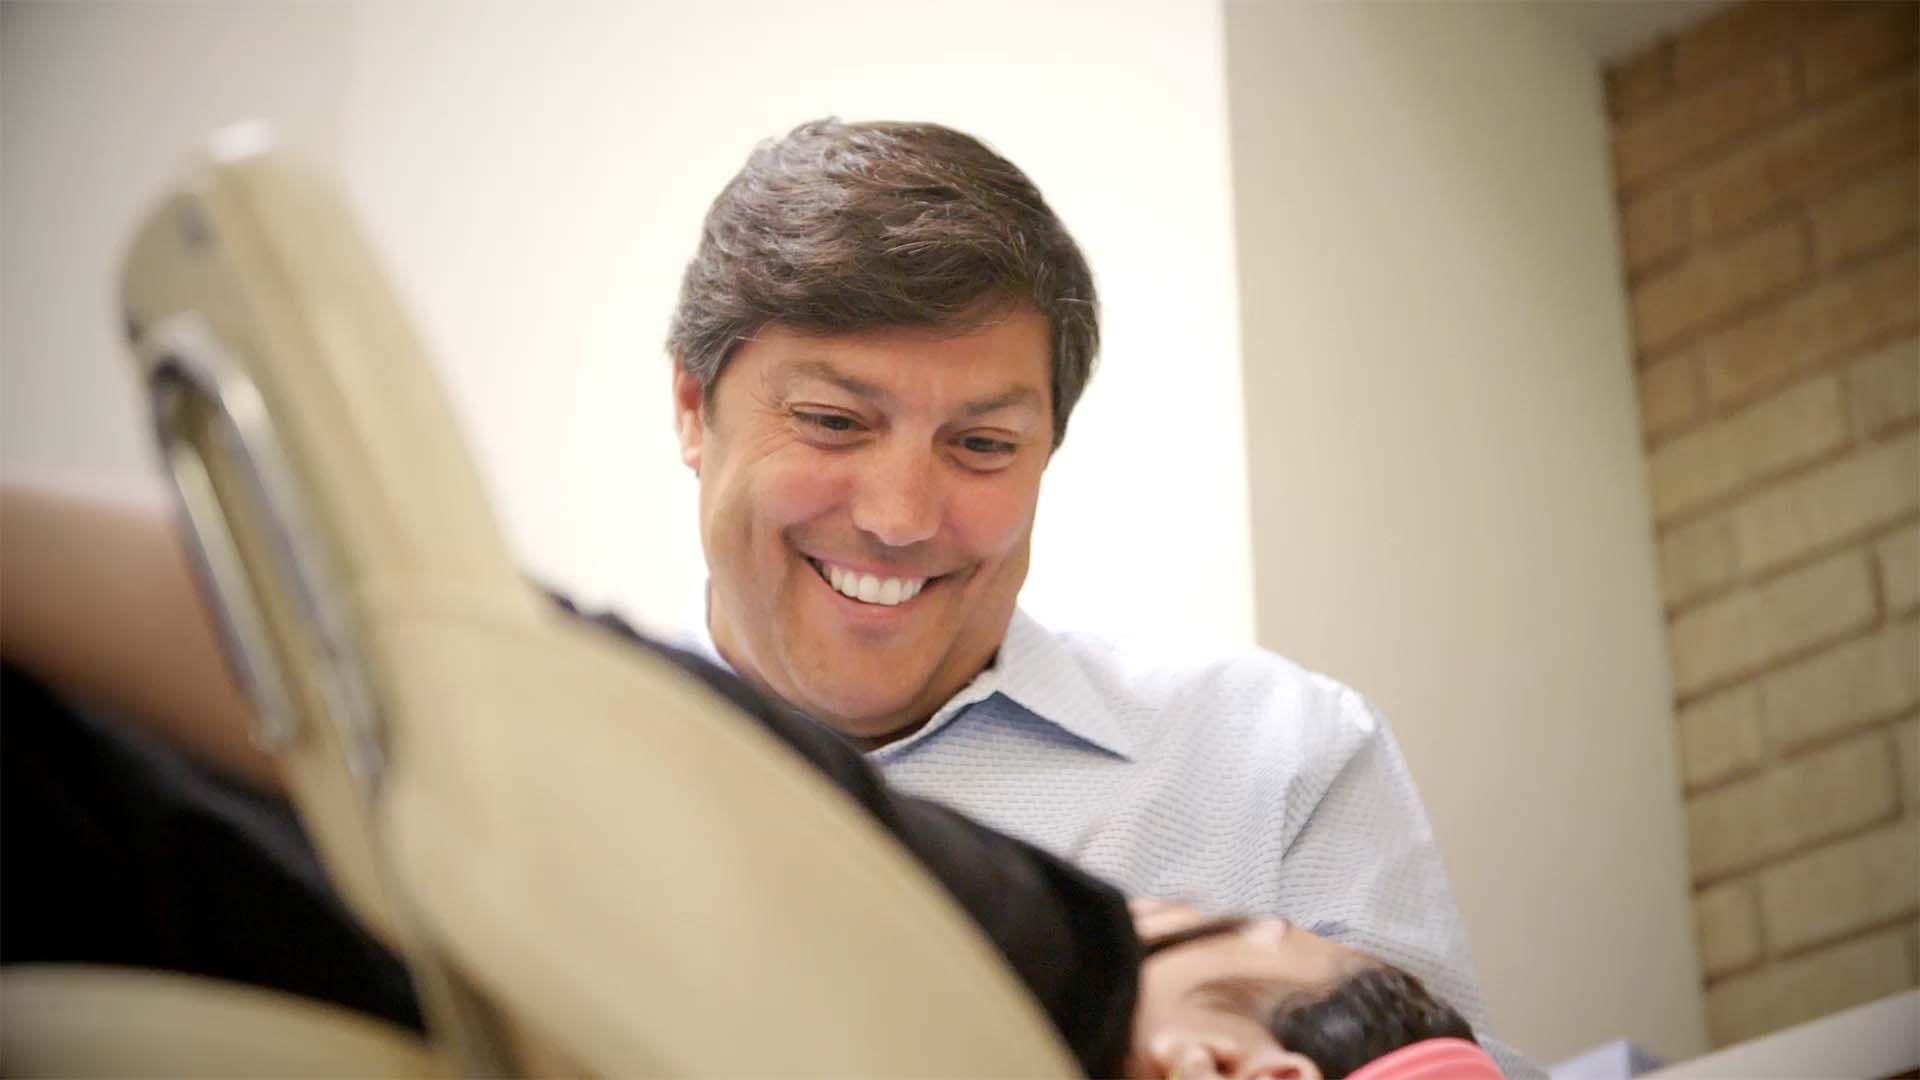 Dr Stefen Lippitz smiles while examining a patient from Highland Park